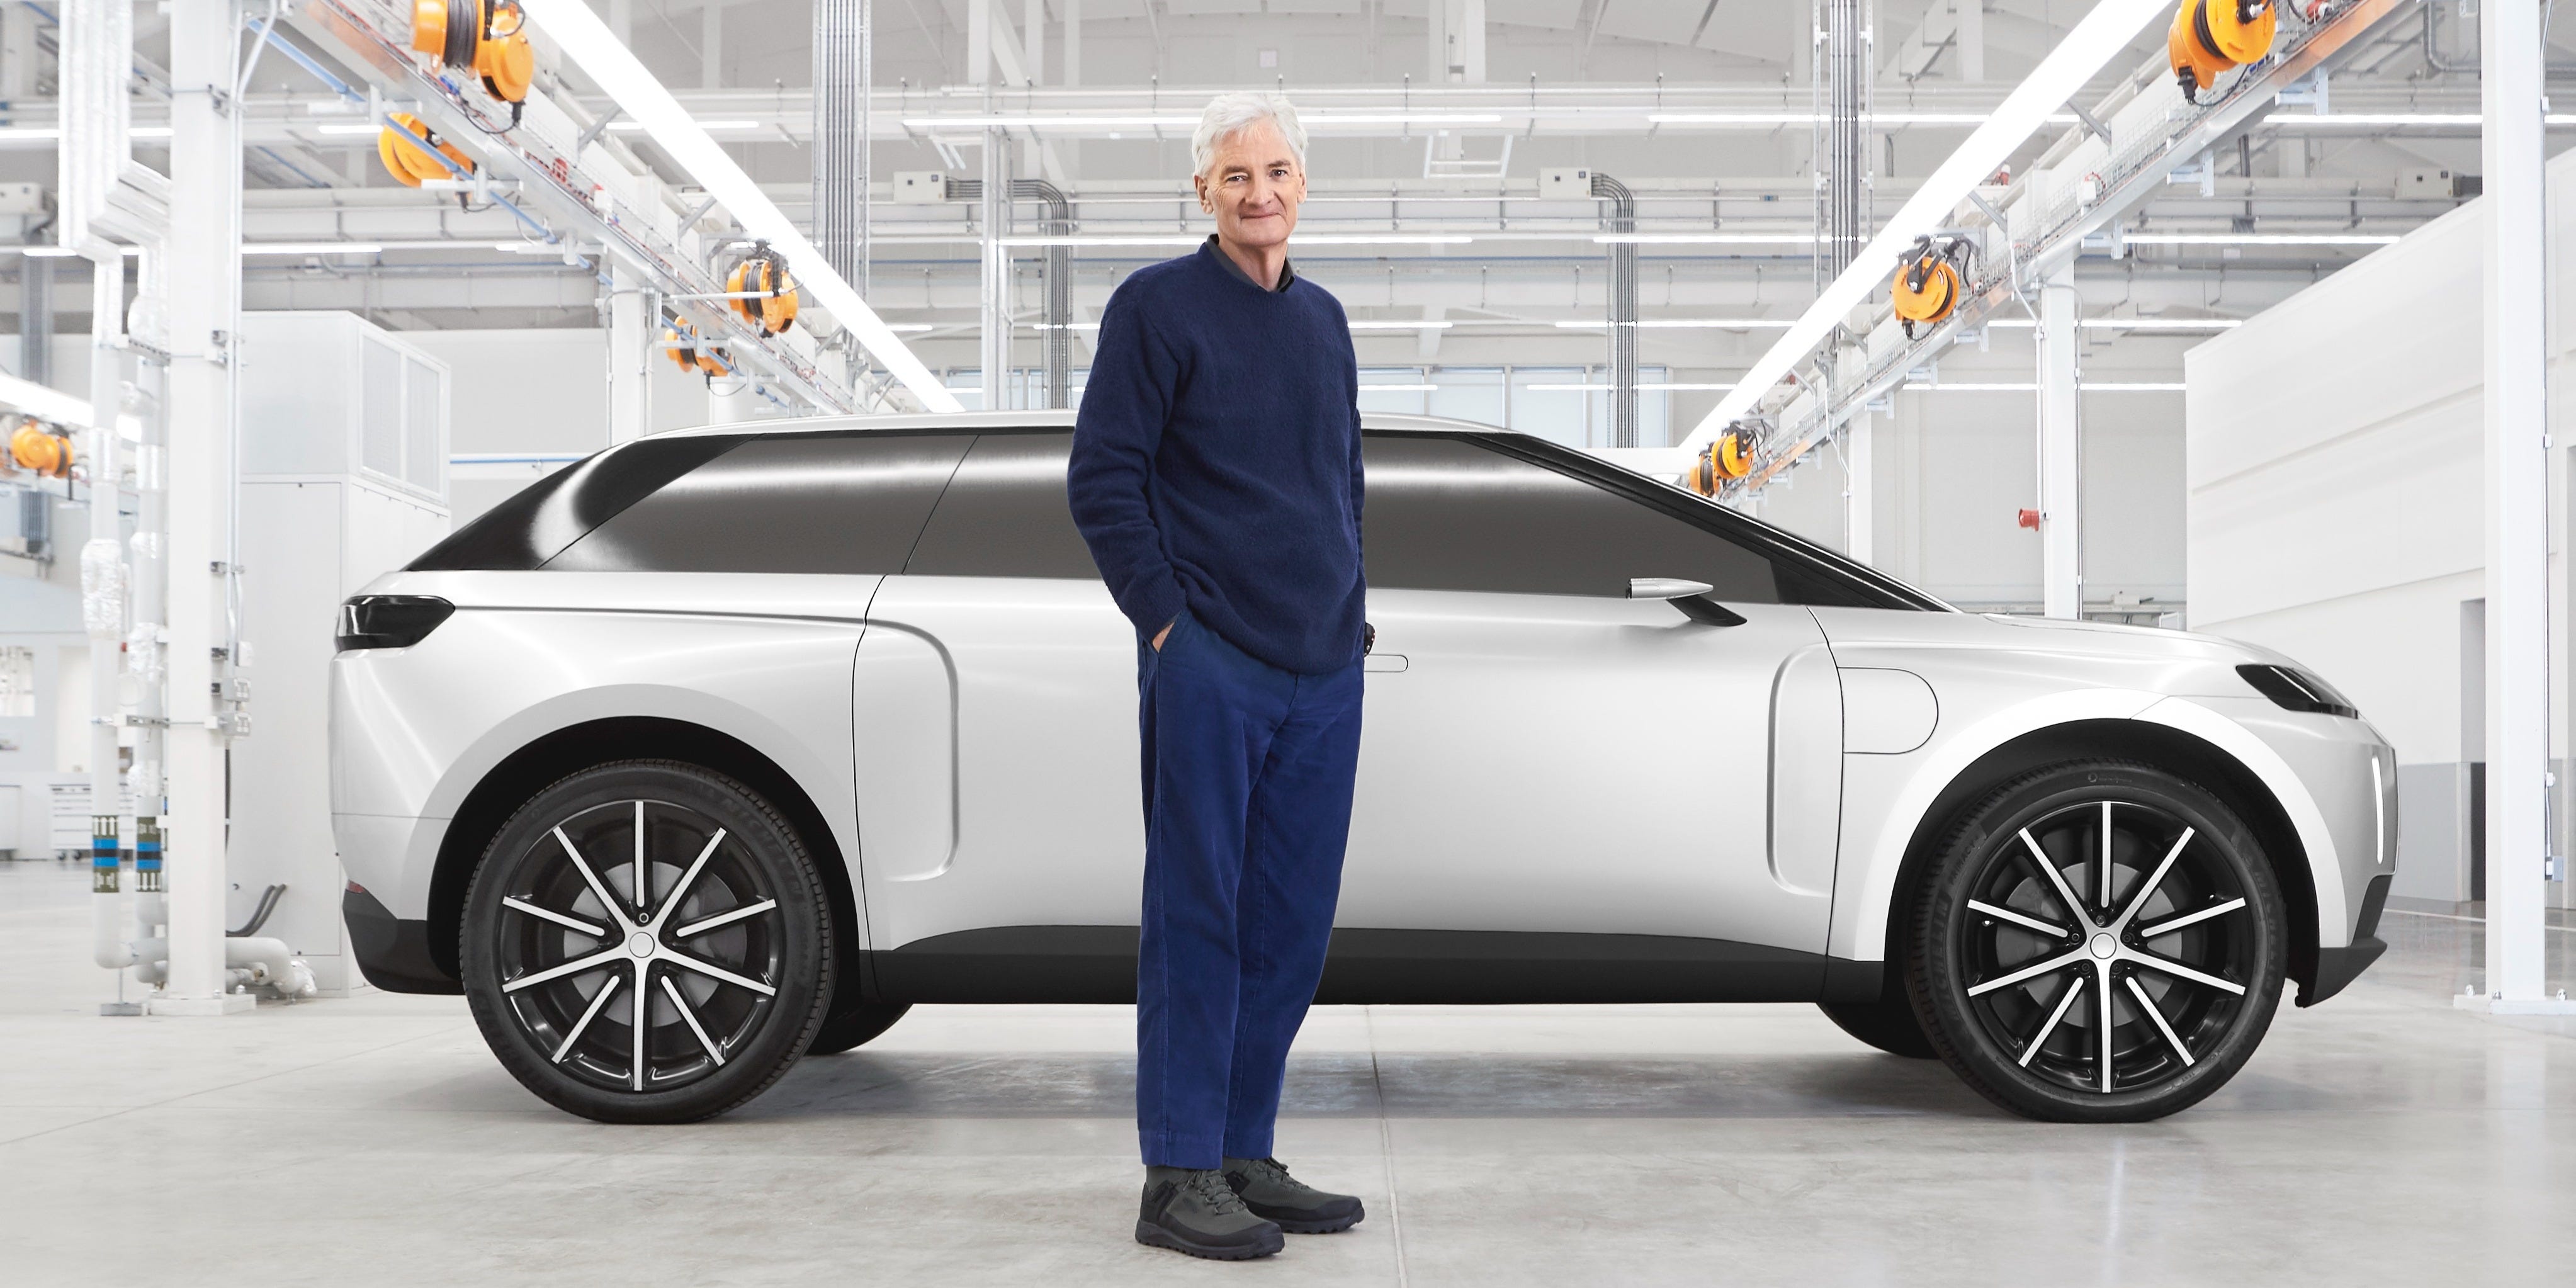 Dyson poured $629 million into an electric car before abandoning it — here’s what its Tesla competitor was supposed to look like